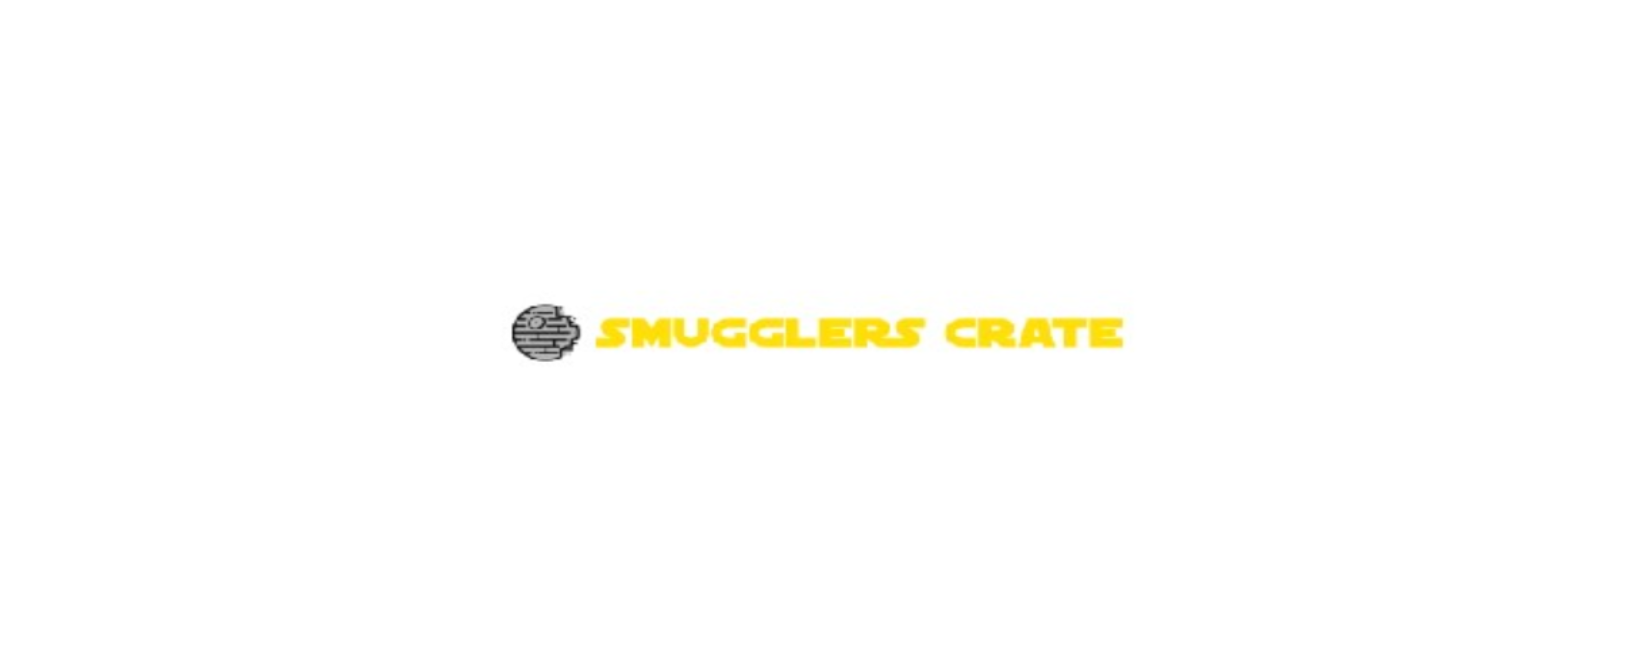 Smugglers Crate Discount Code 2022